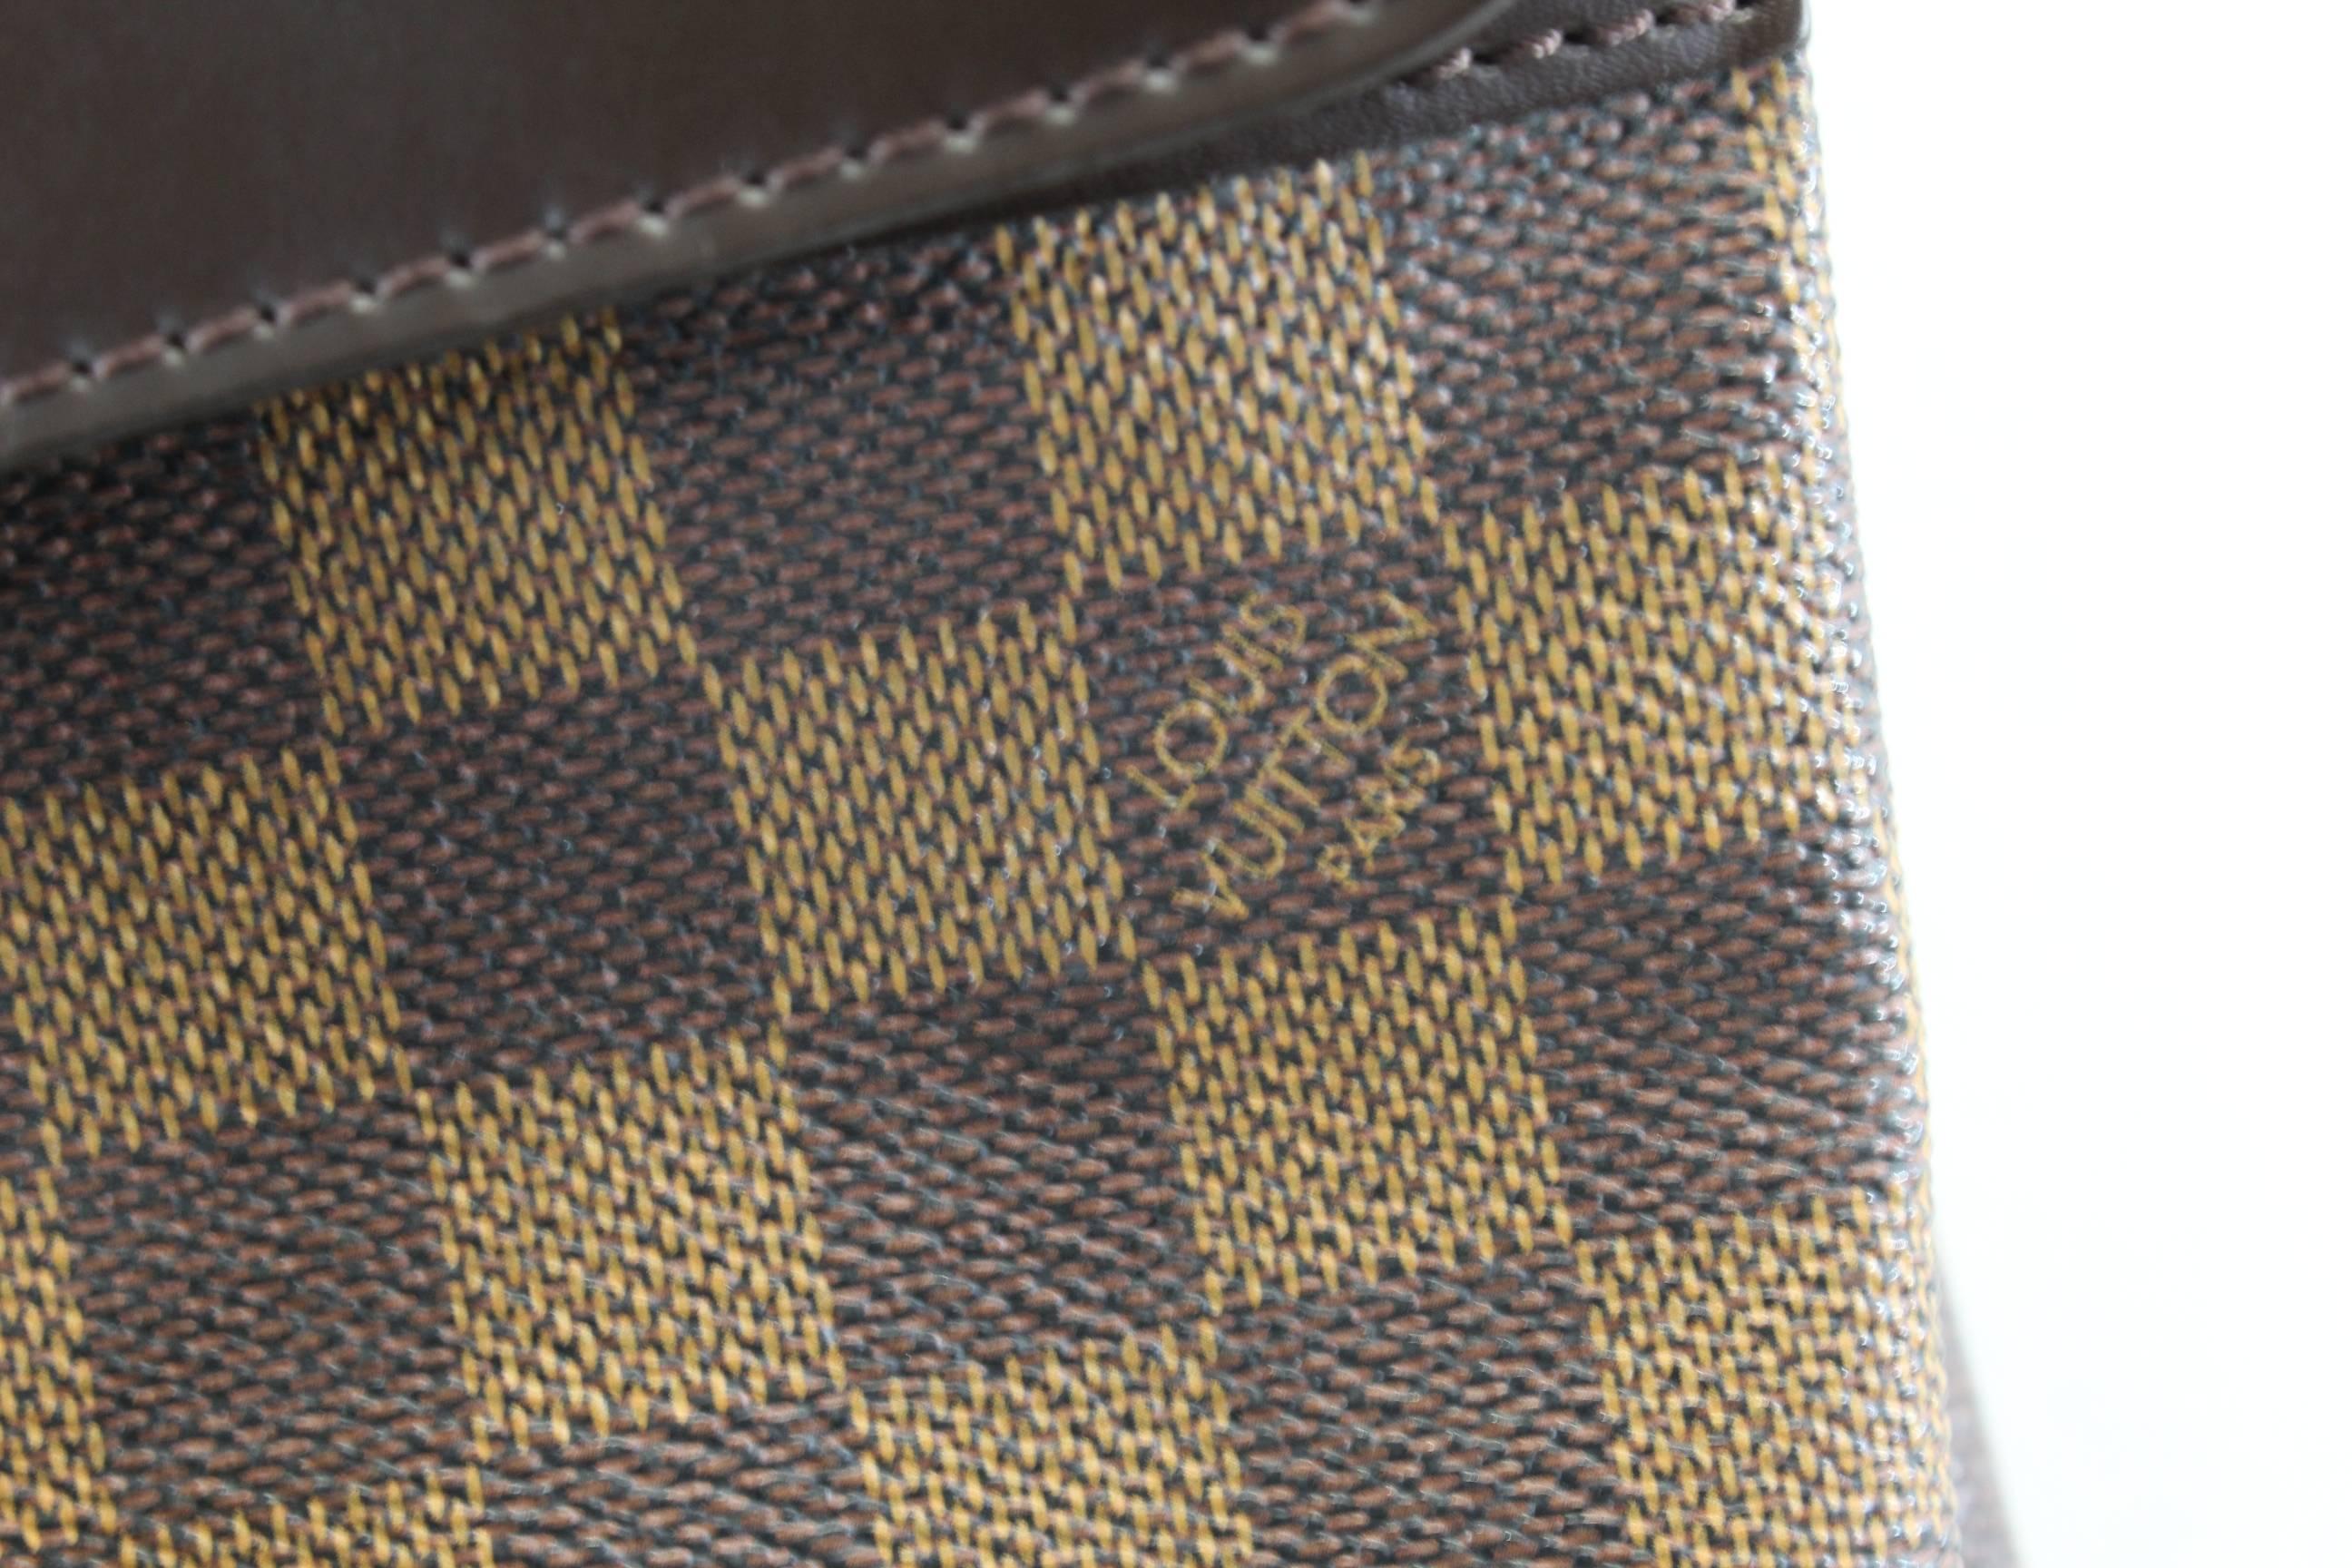 Women's or Men's Louis Vuitton Soho Backpack in damier Ebene Canvas and brown Leather